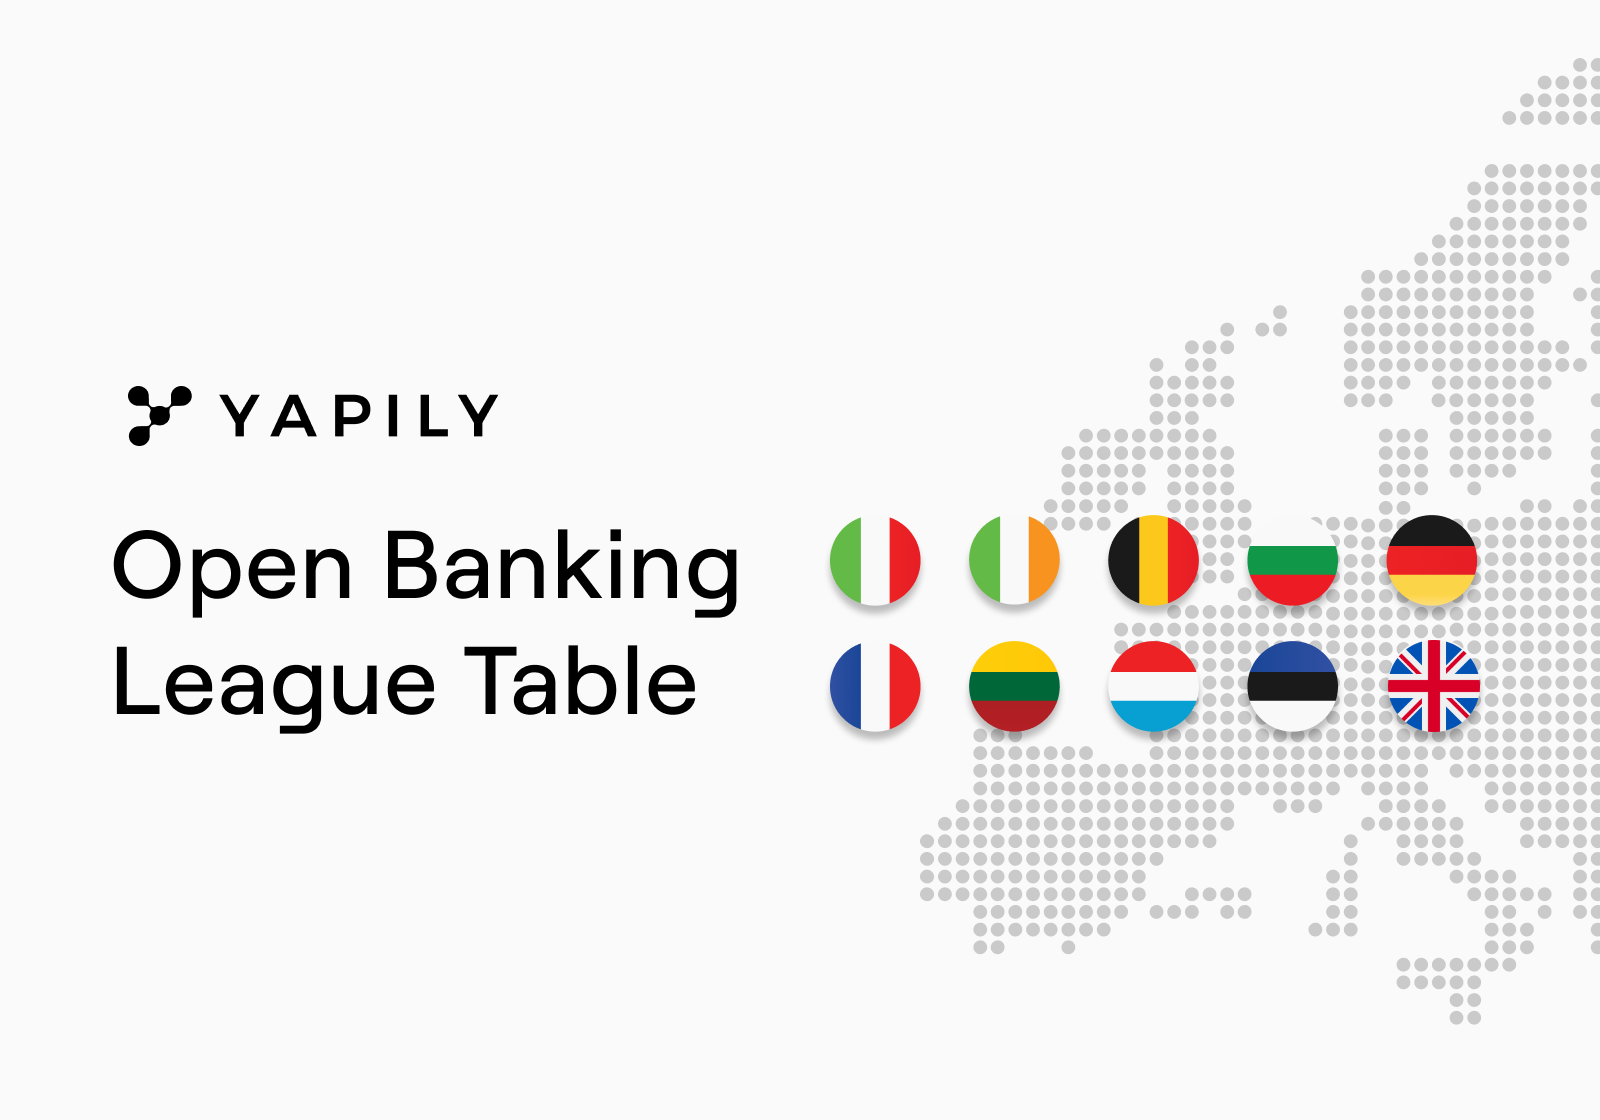 In line with the upcoming European Championships, we have put together a report to rank the countries in terms of Open Banking environment. We have assessed the readiness of the regulatory and product environment to apply a score to each country.